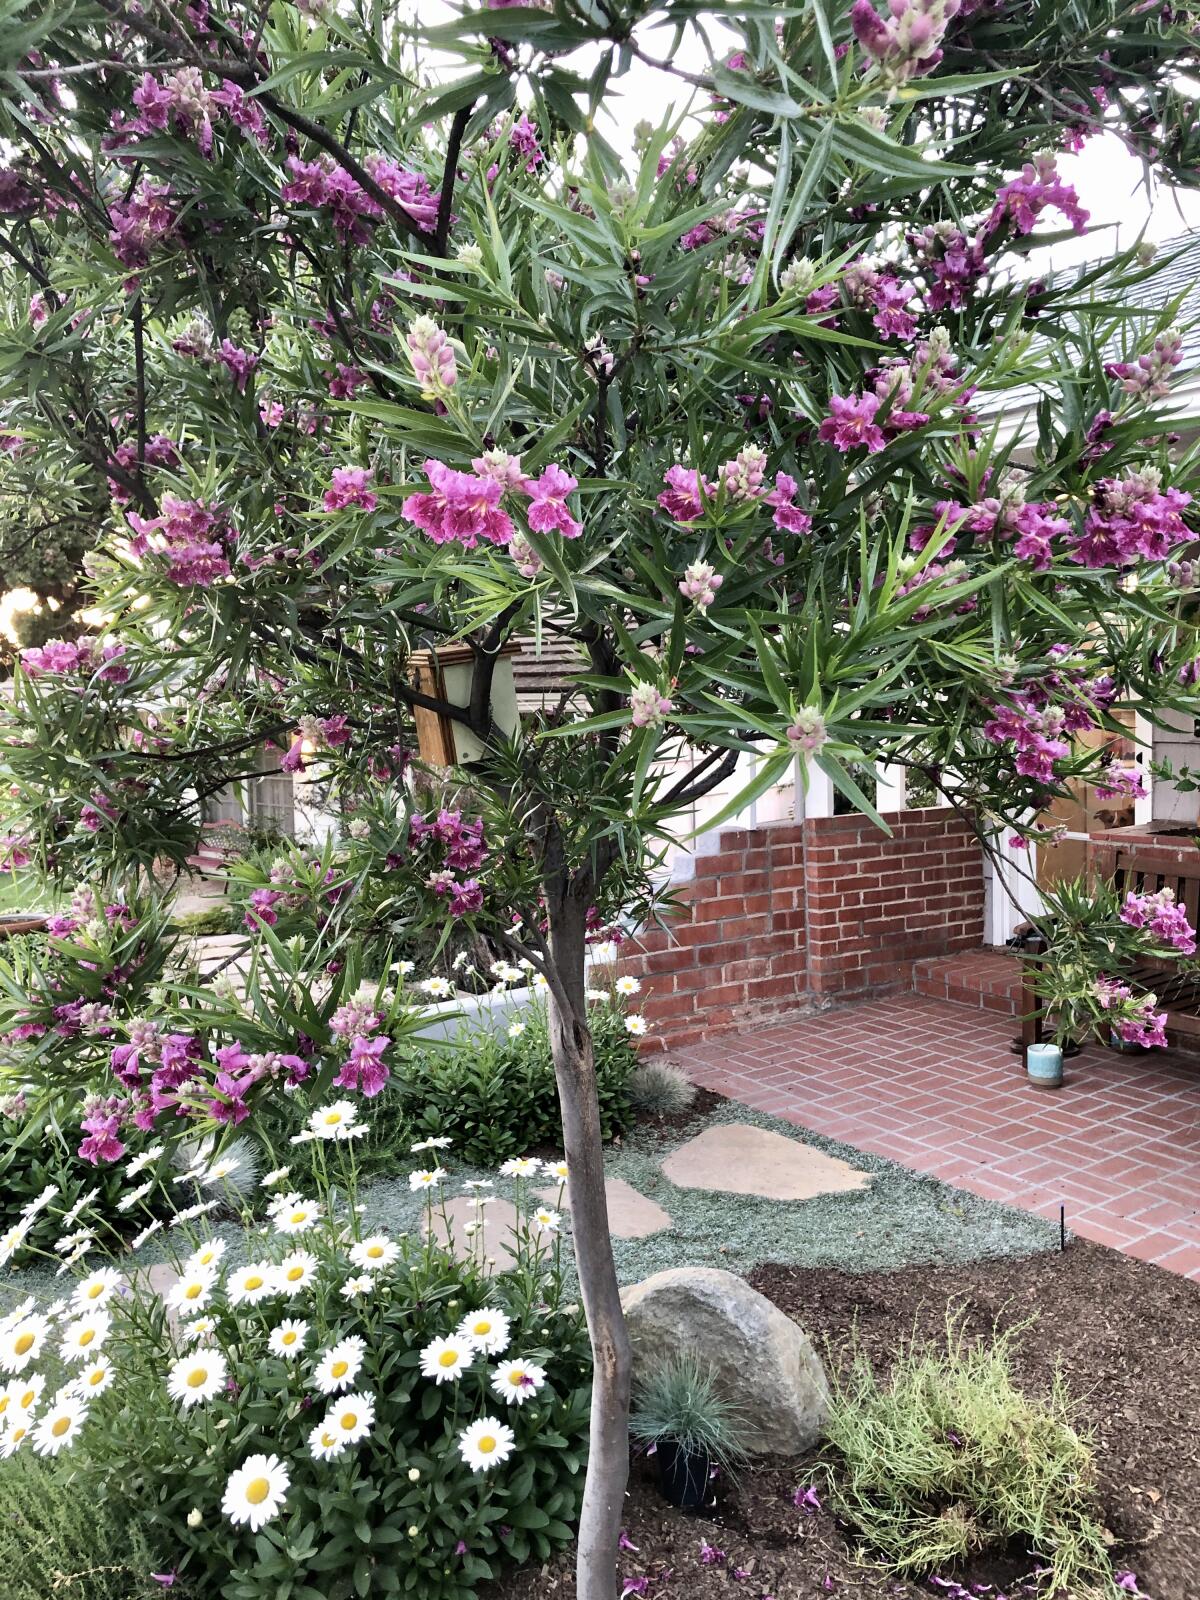 A desert willow tree blooms with pink flowers.